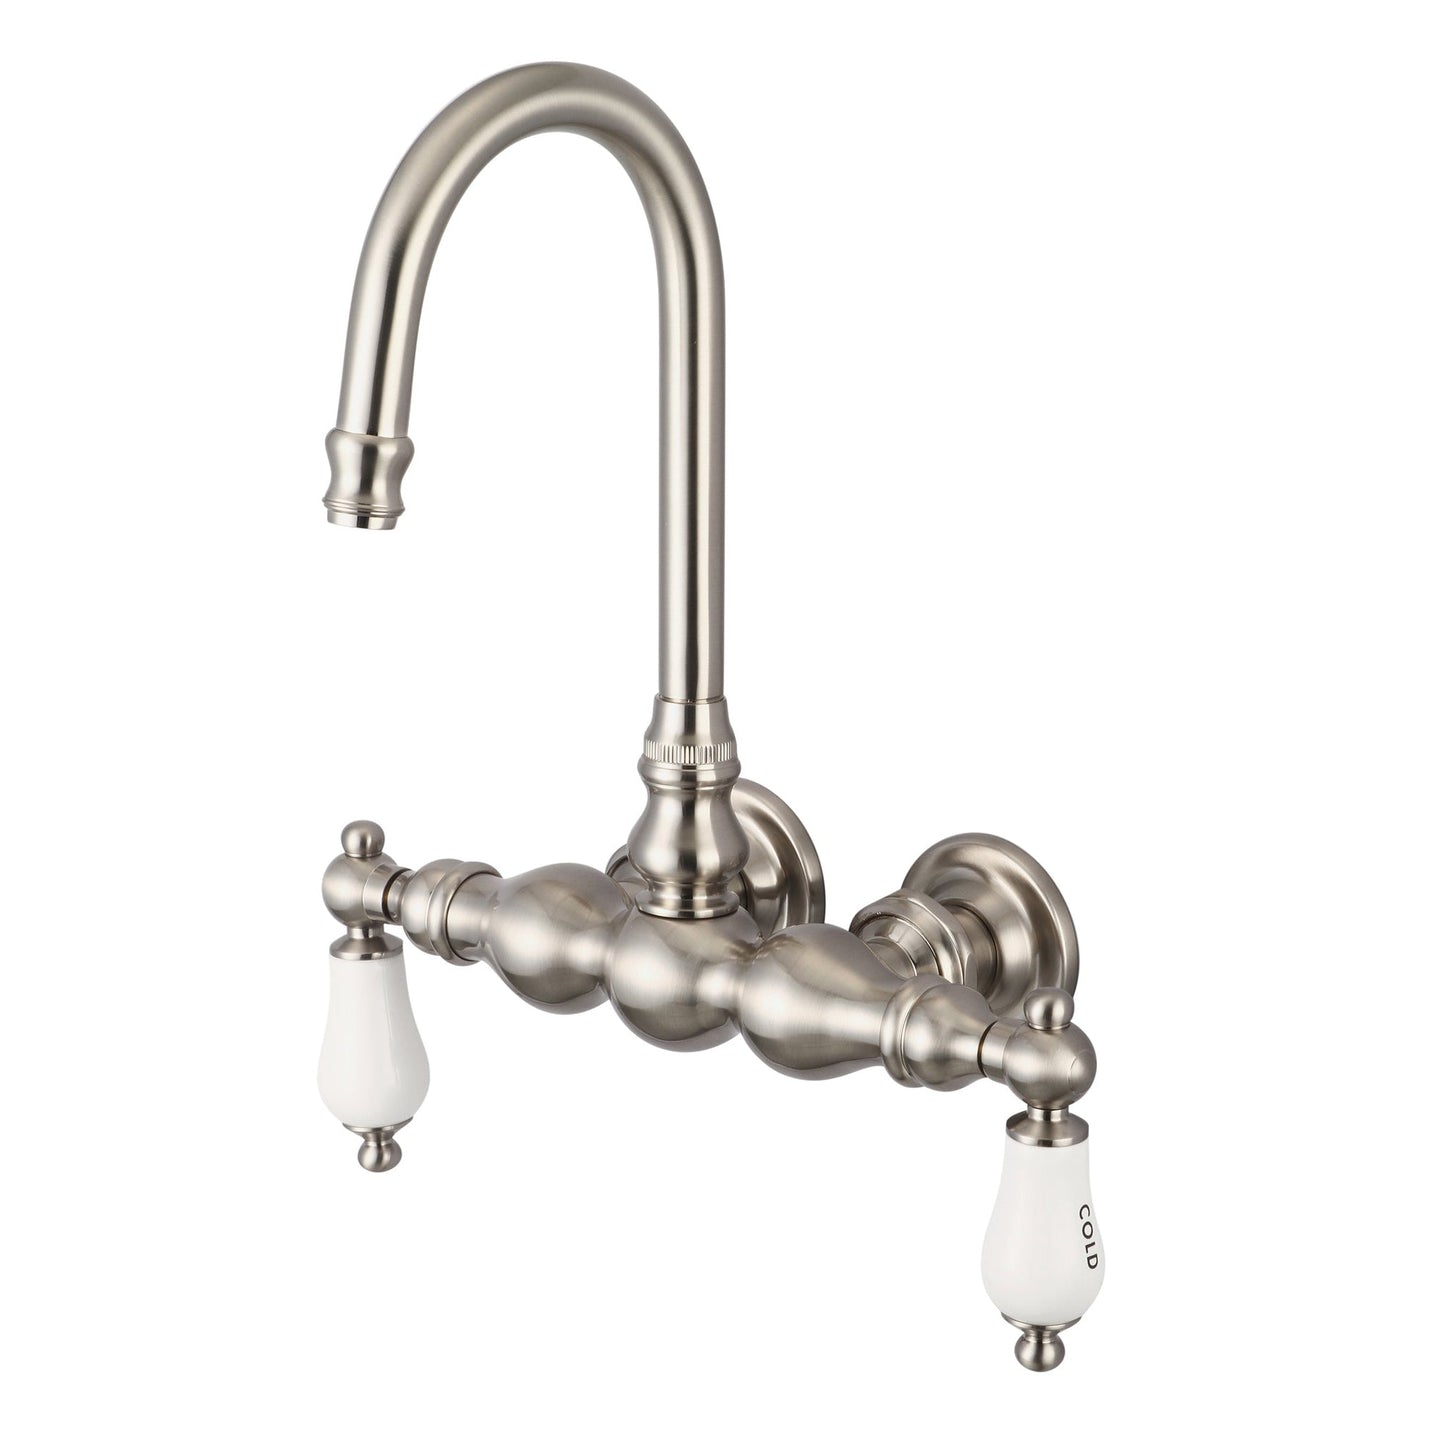 Water Creation Vintage Classic Center Wall Mount Tub F6-0014 9.25" Grey Solid Brass Faucet With Gooseneck Spout And Straight Wall Connector And Porcelain Lever Handles, Hot And Cold Labels Included